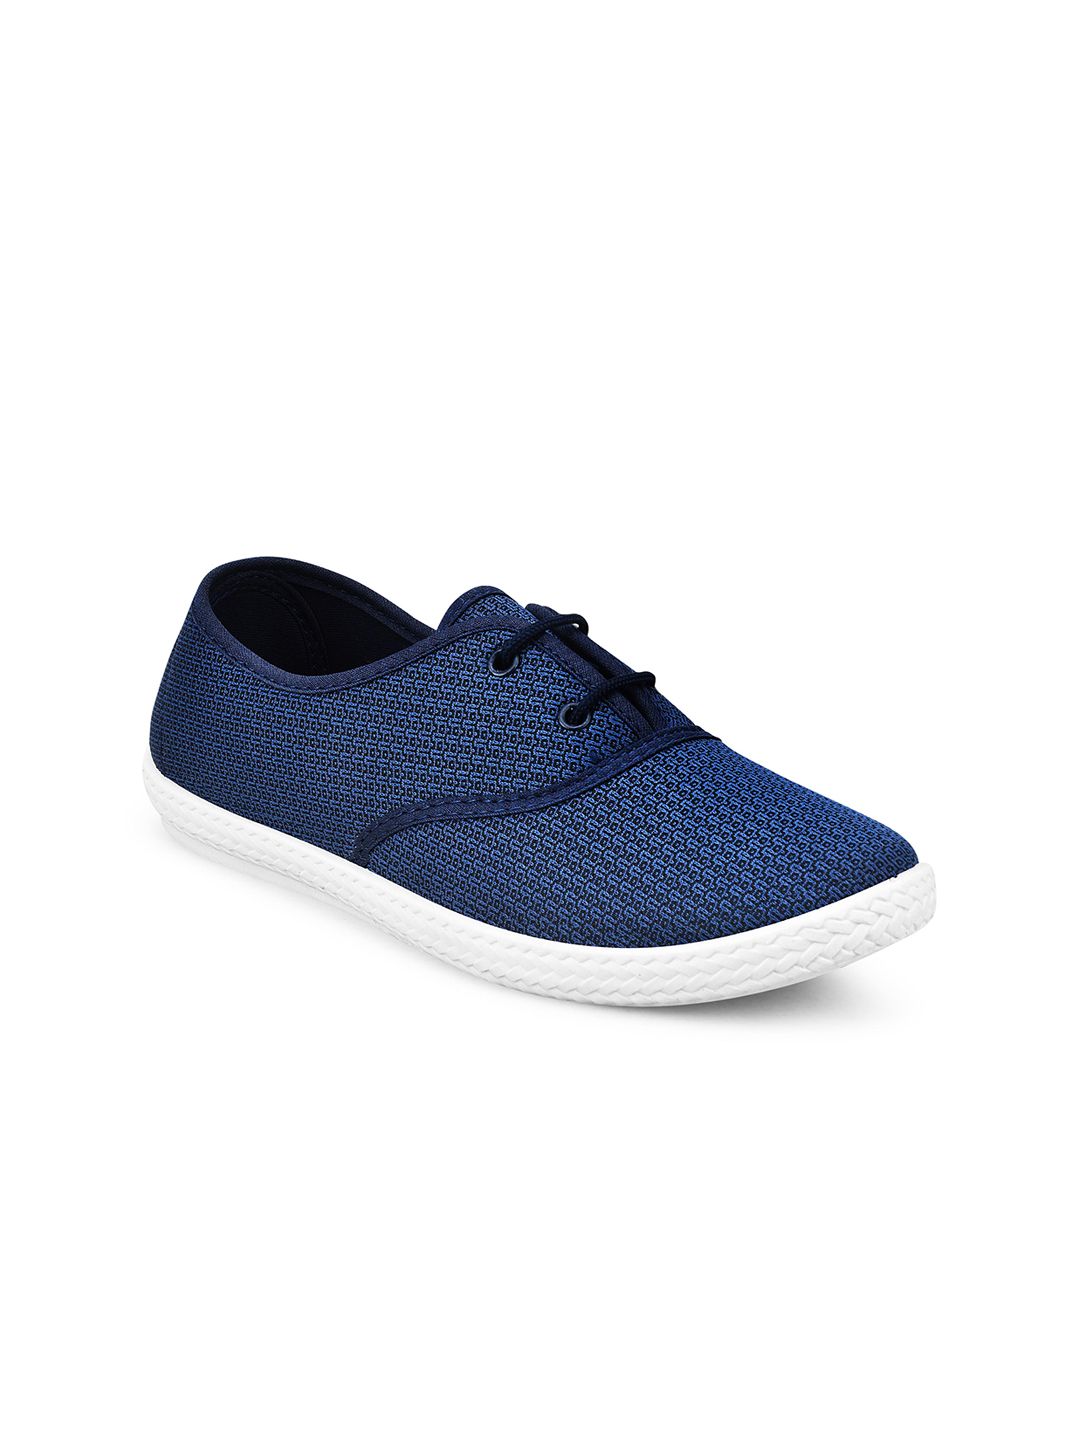 Paragon Women Woven Design Lightweight Sneakers Price in India